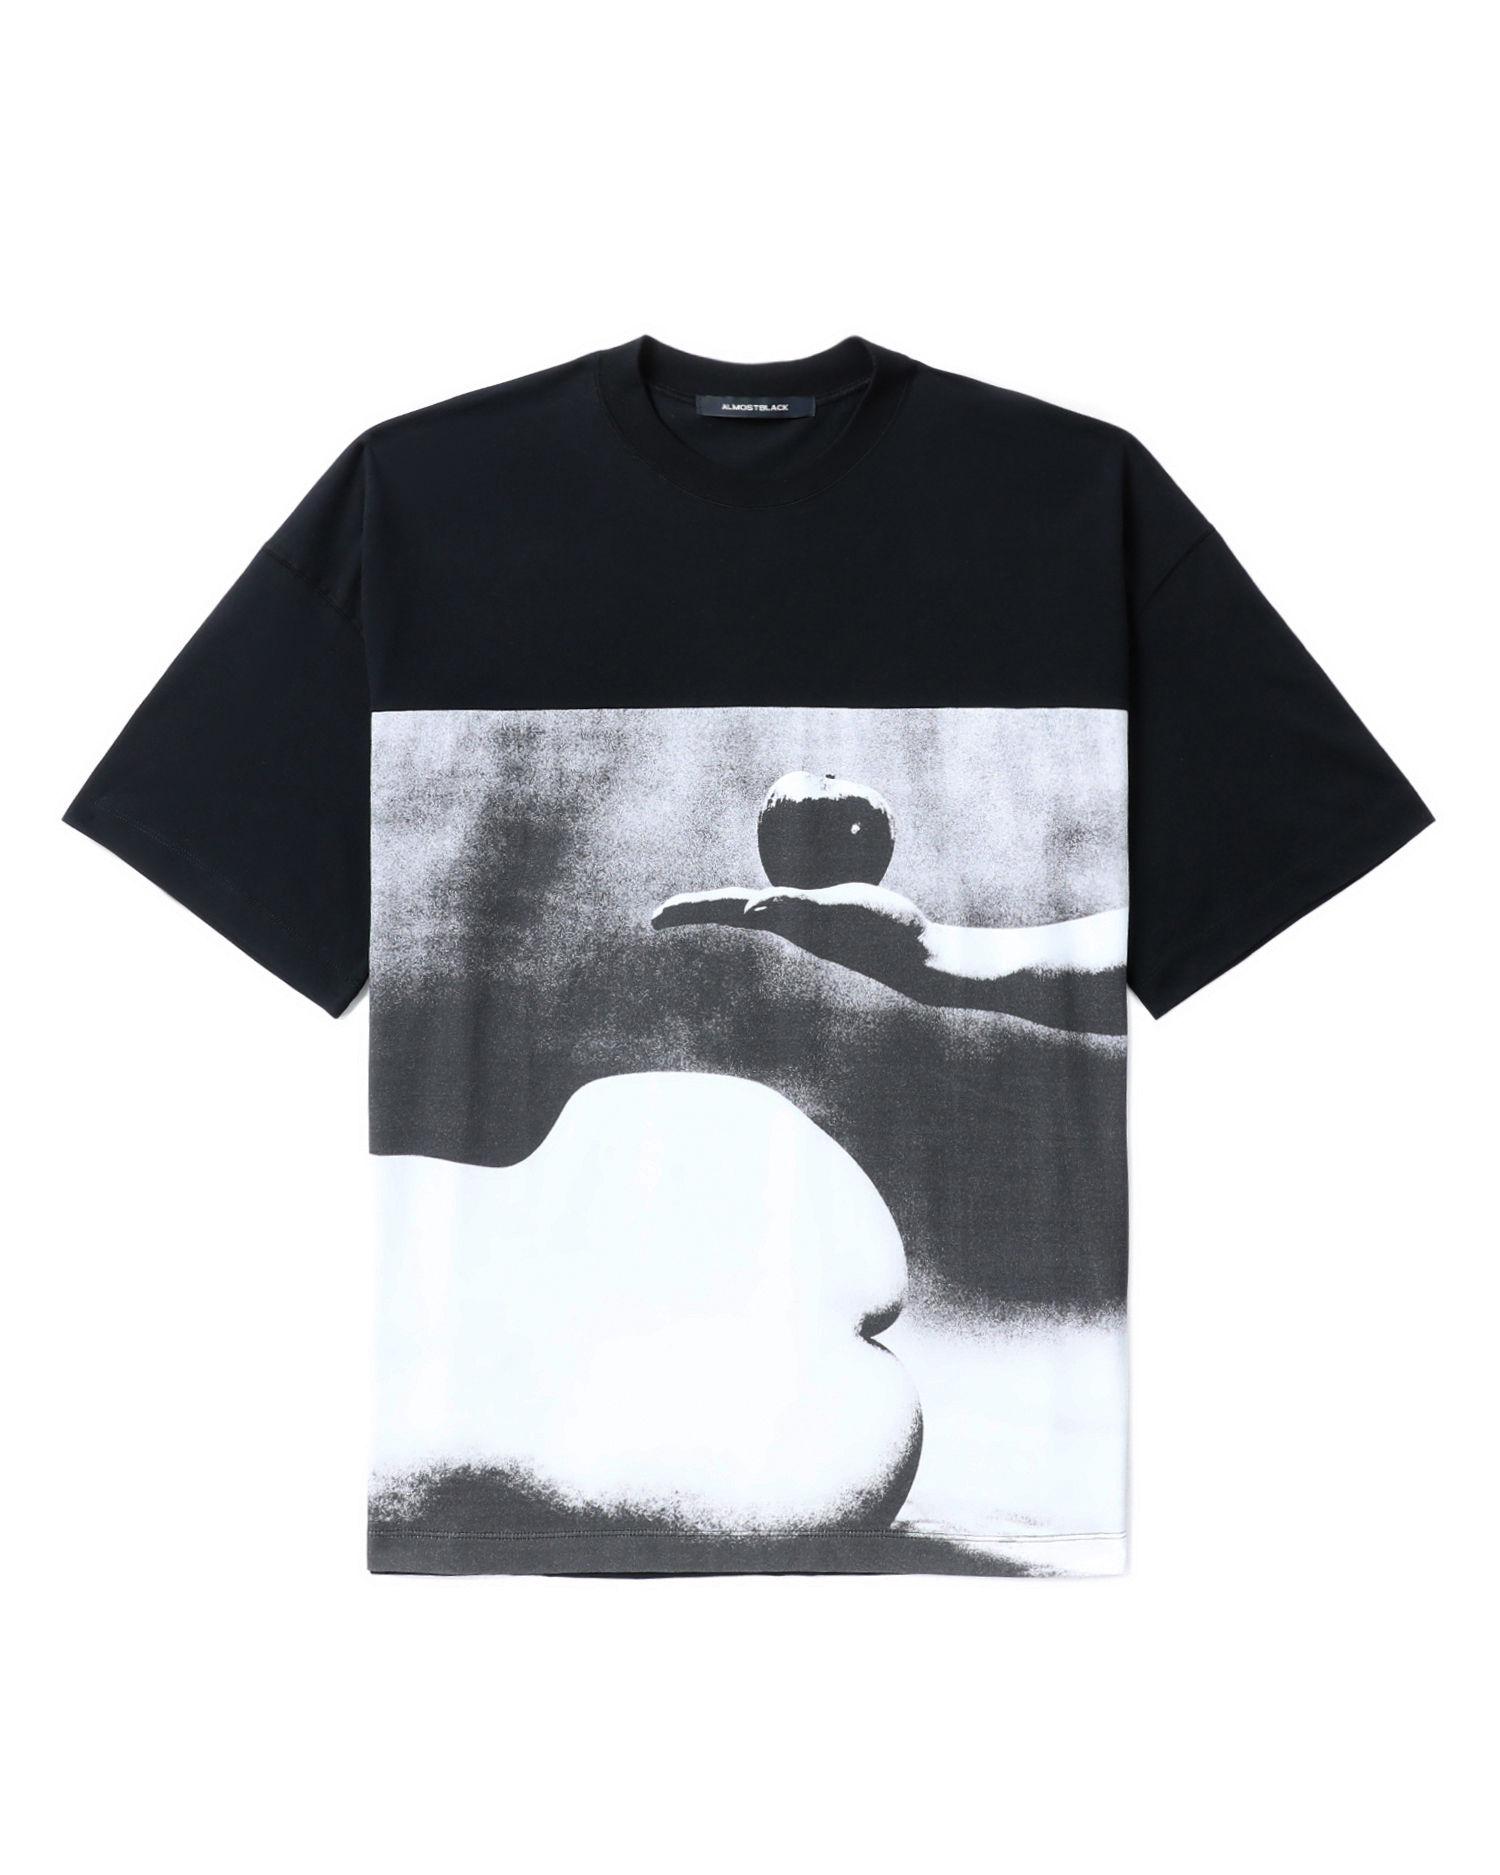 Graphic tee by ALMOSTBLACK